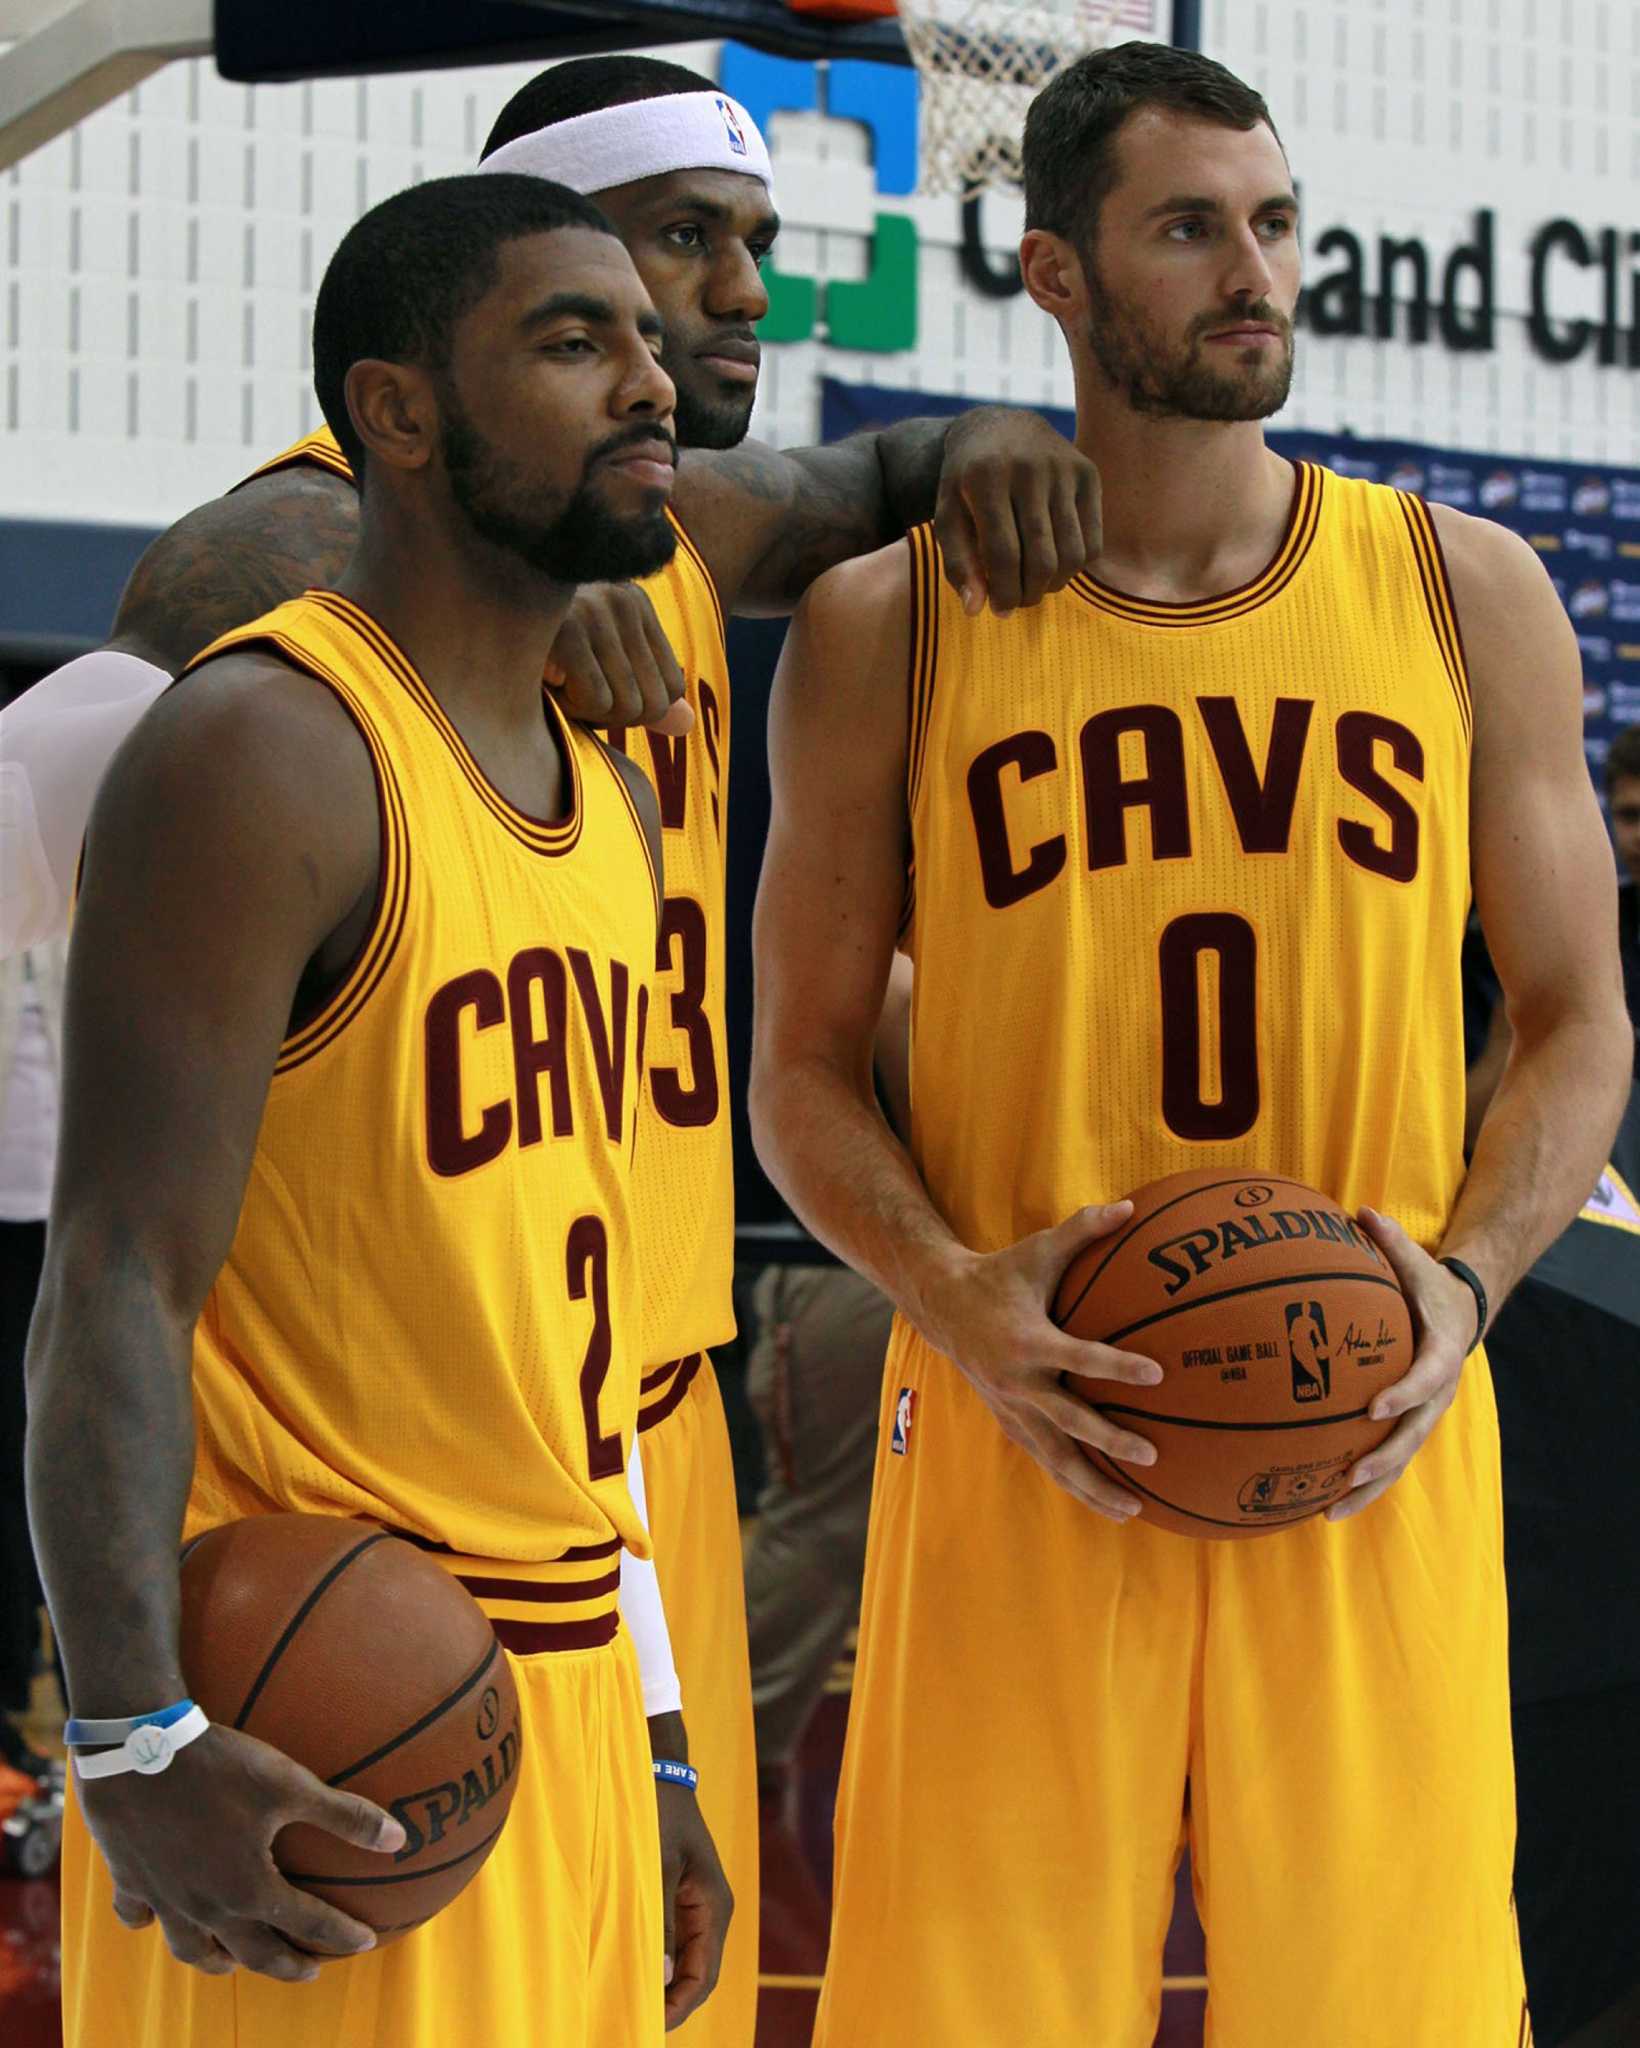 CNN Philippines - LeBron James and Kyrie Irving each had 41 points